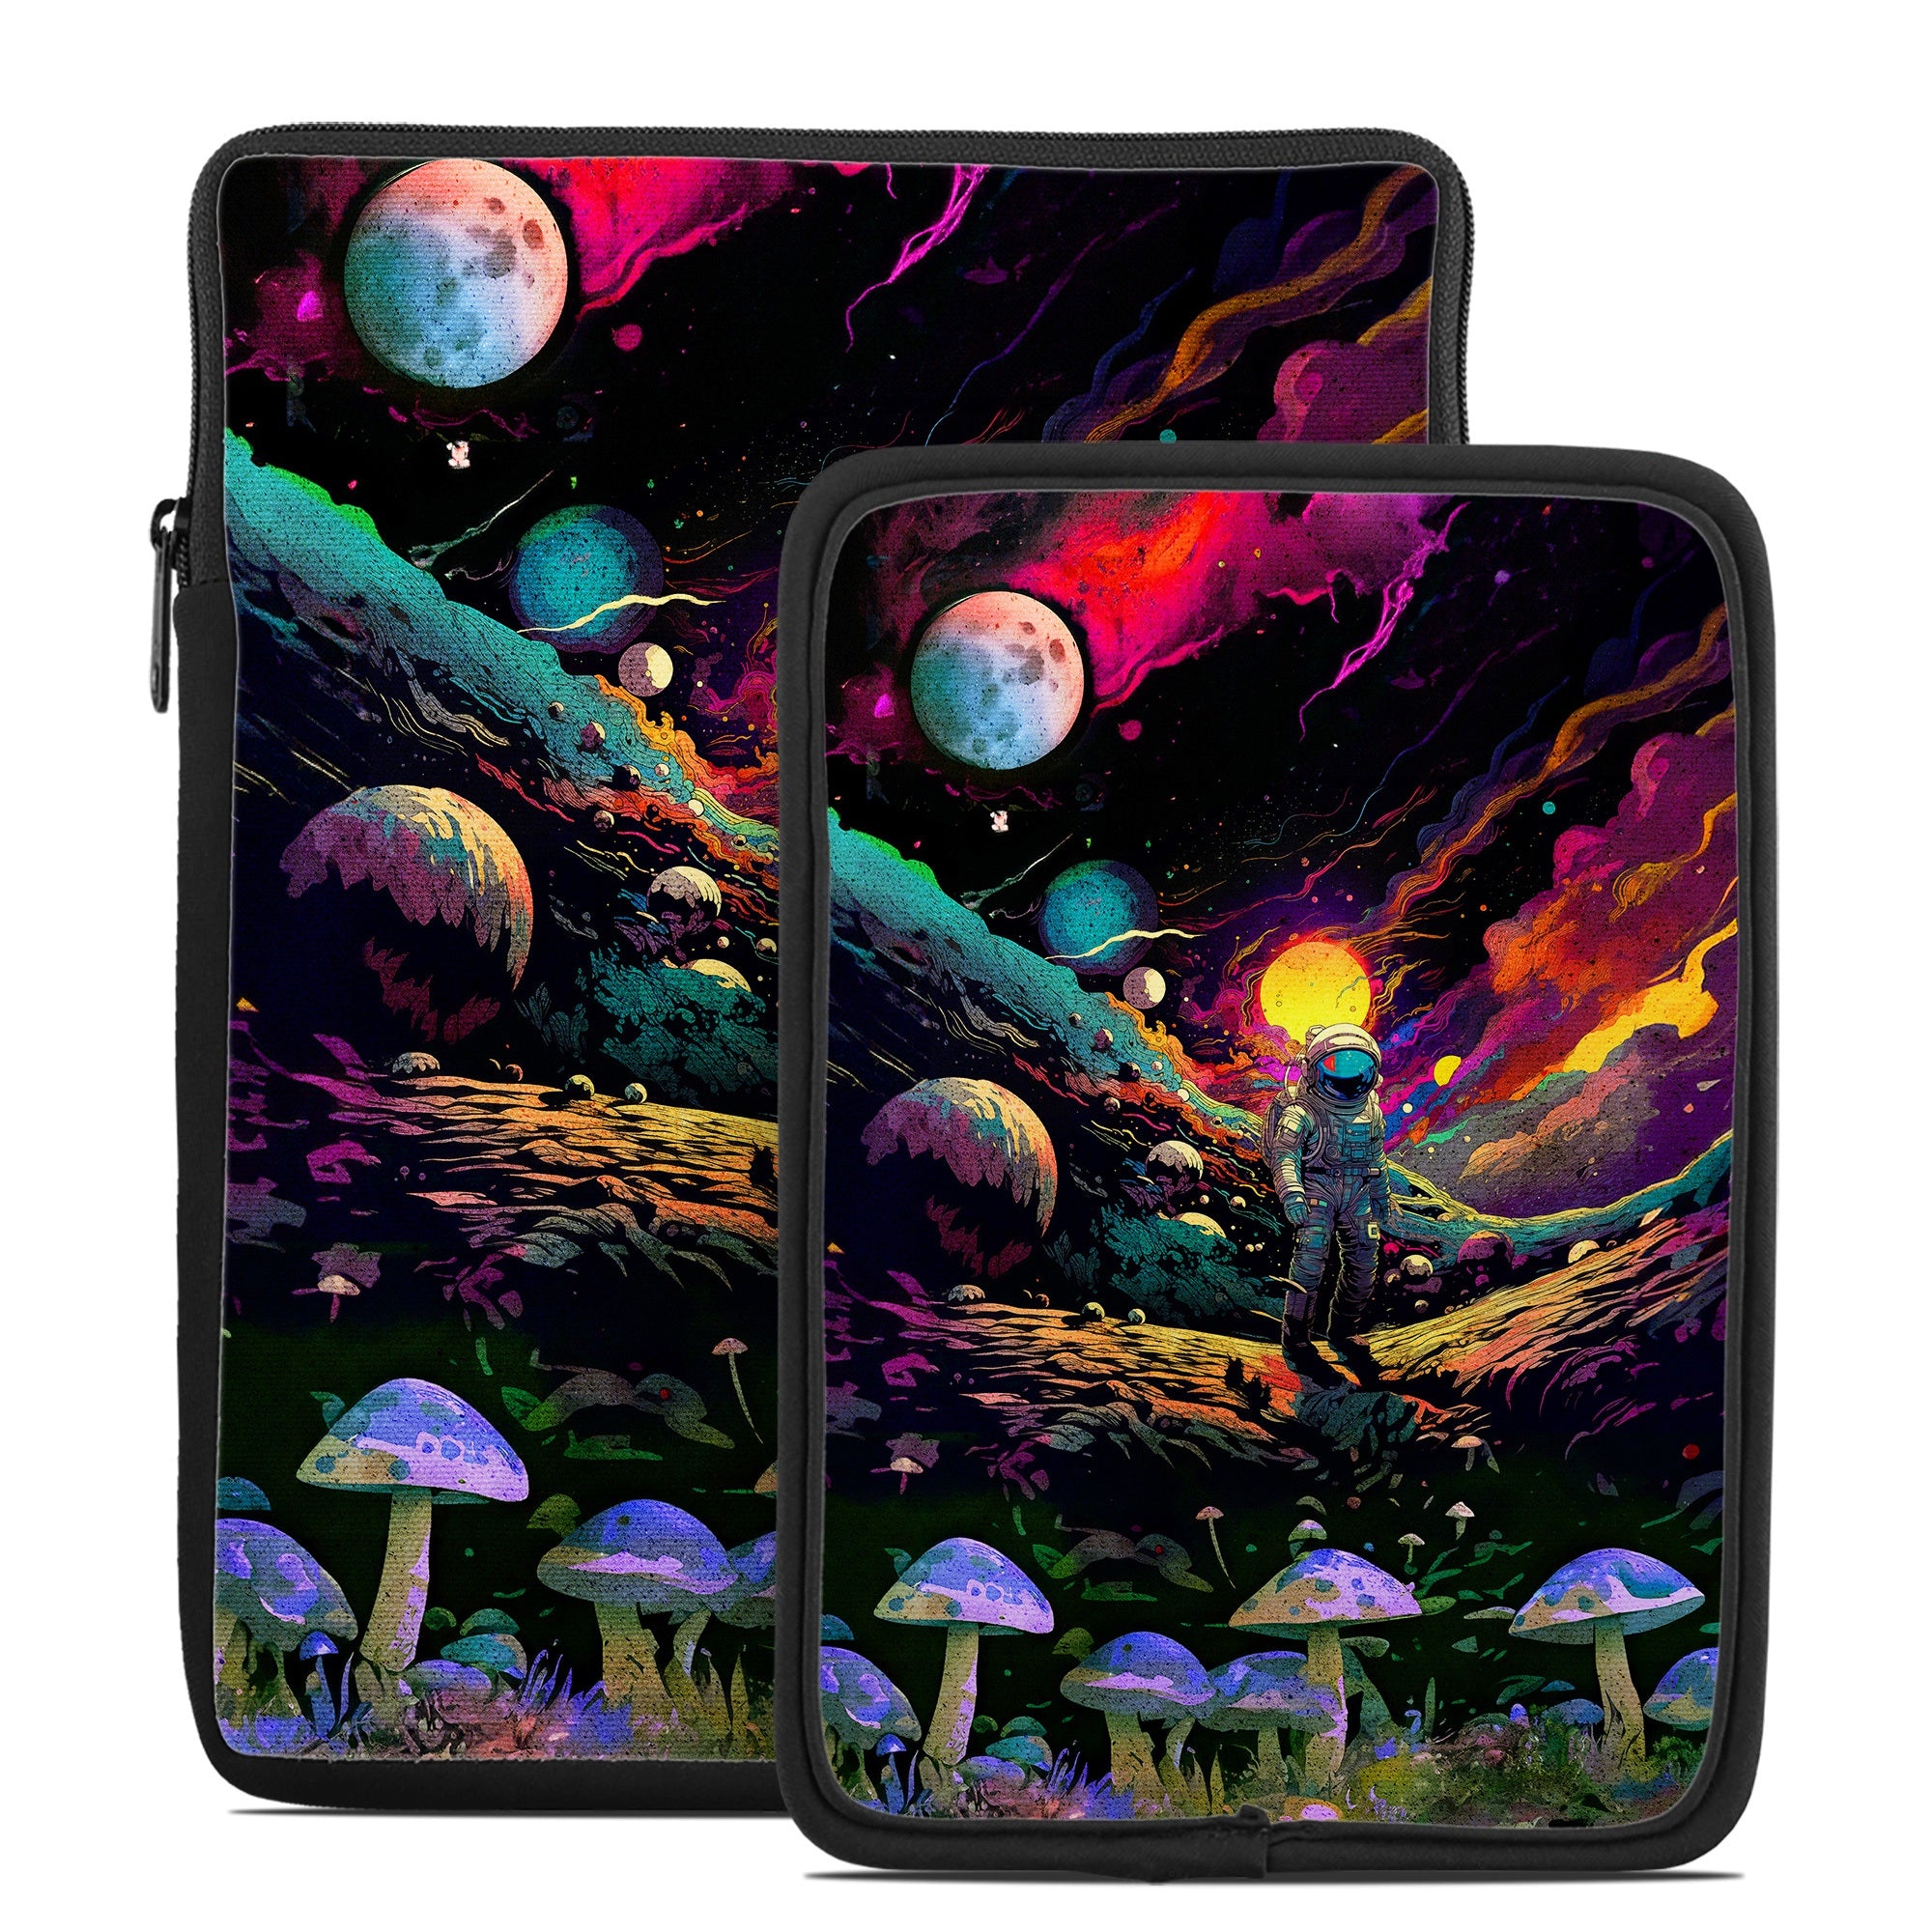 Trip to Space - Tablet Sleeve